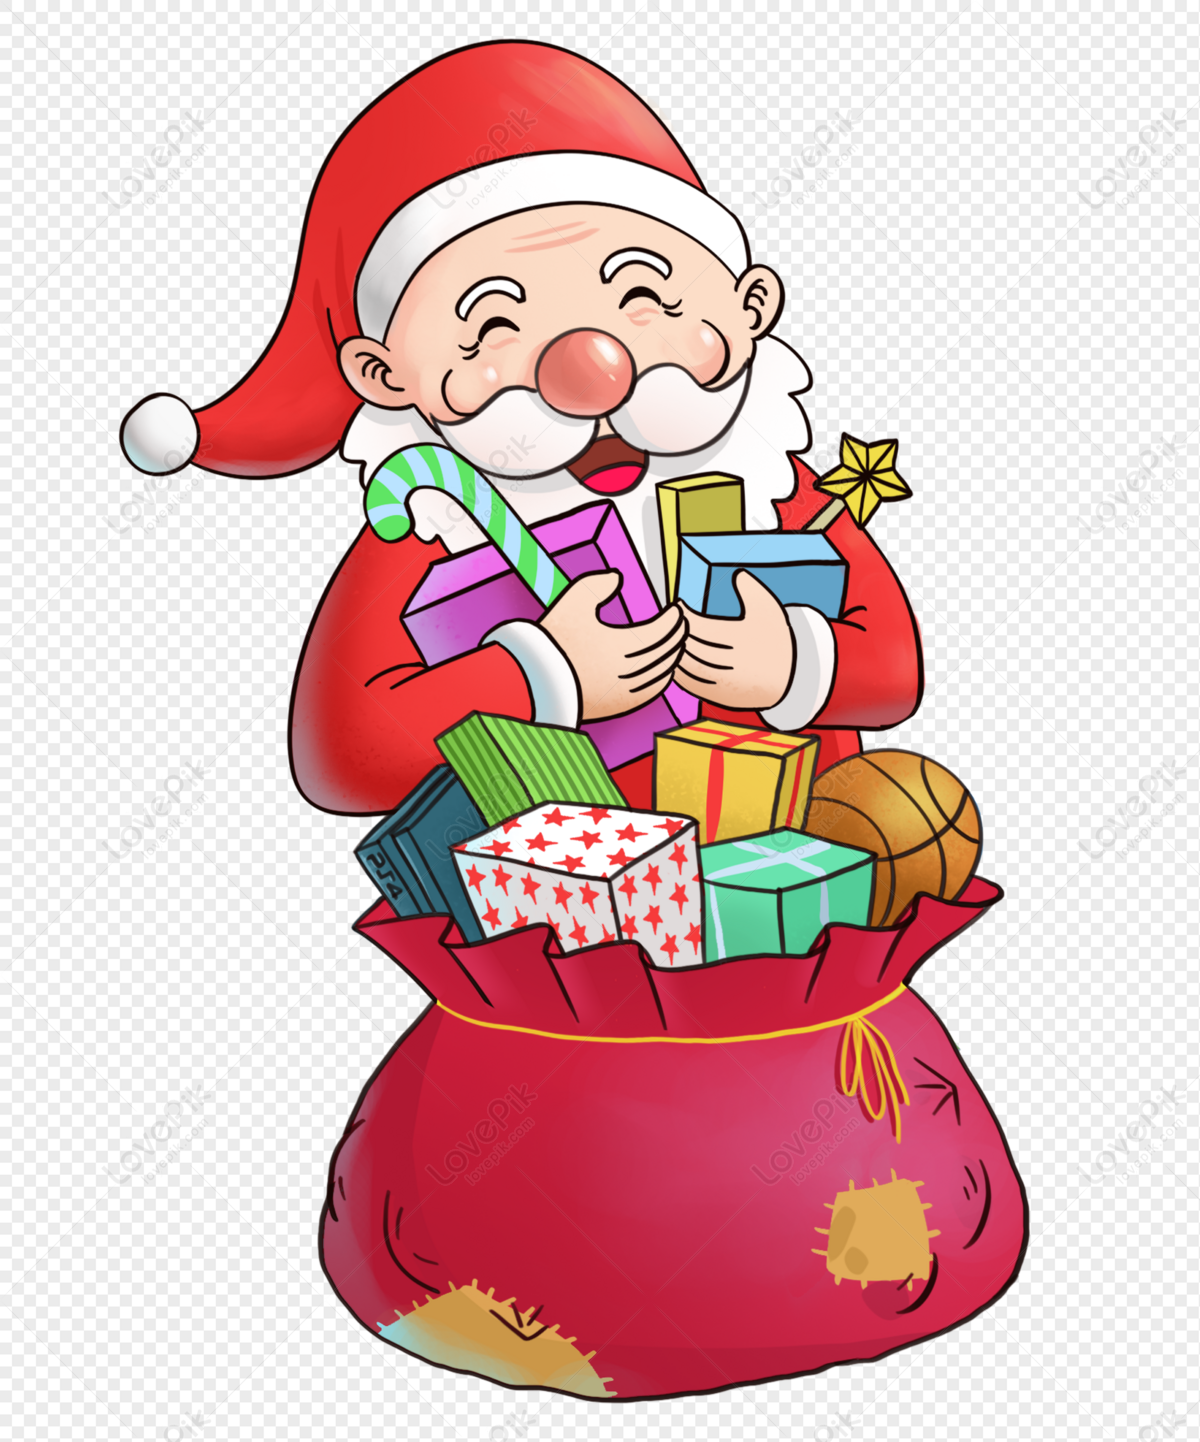 Santa Claus may be leveraging NFC technology for seamless global gift  distribution • NFCW